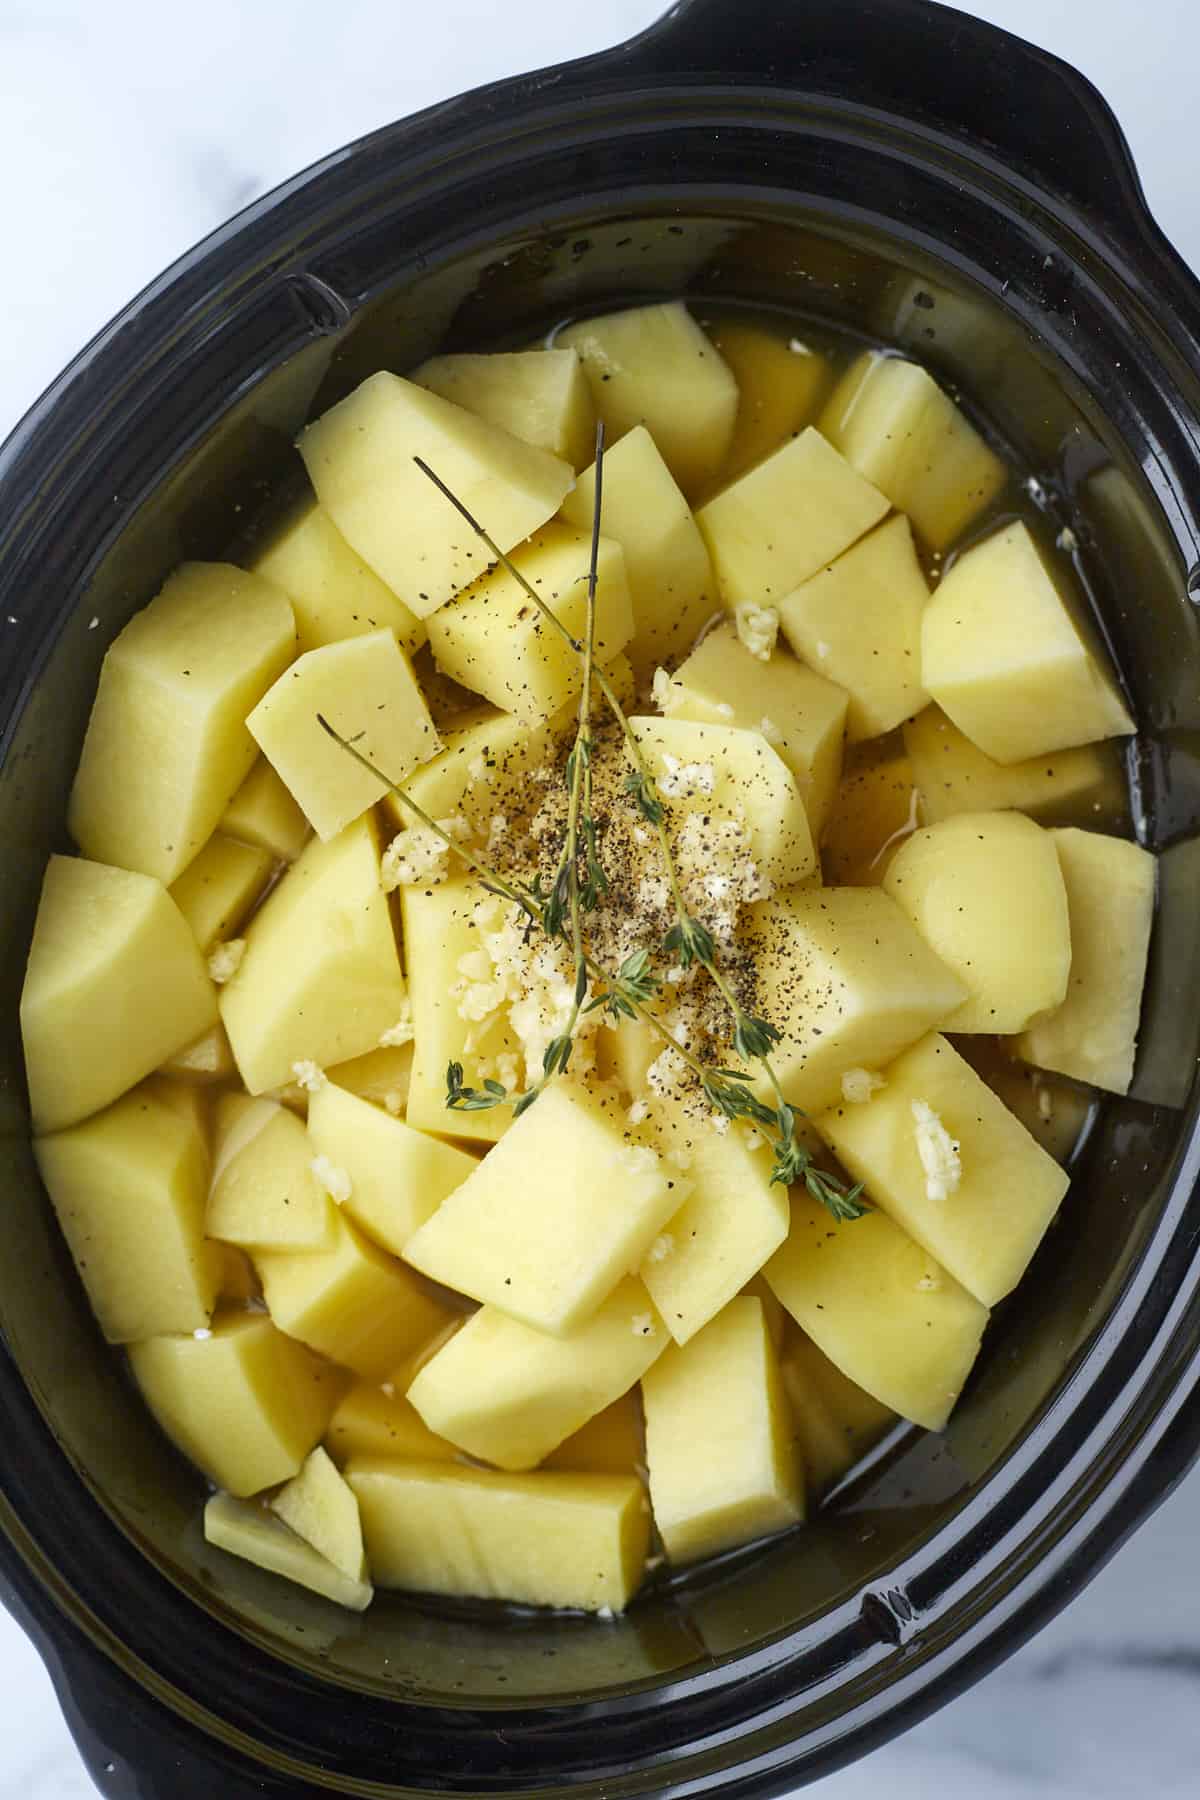 cubed potatoes in a slow cooker with vegetable broth, garlic, and herbs.